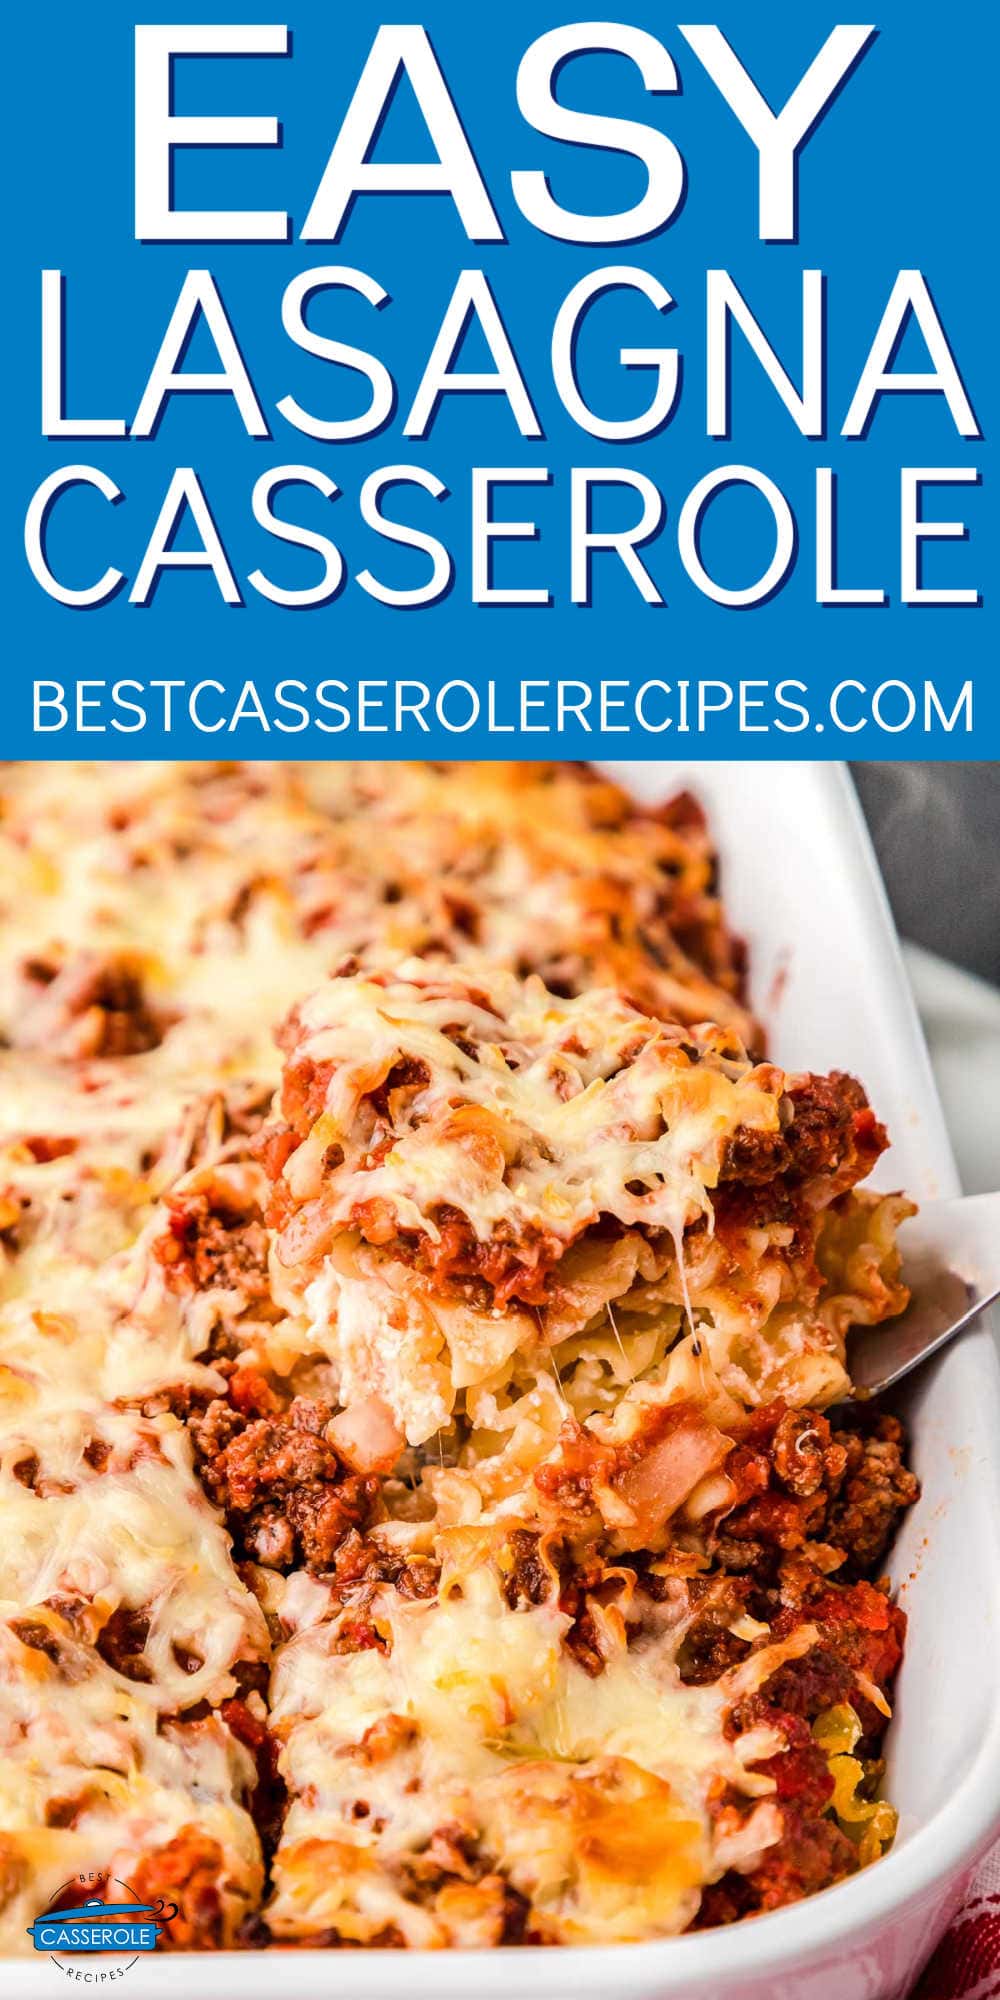 slice of casserole with blue banner and white text